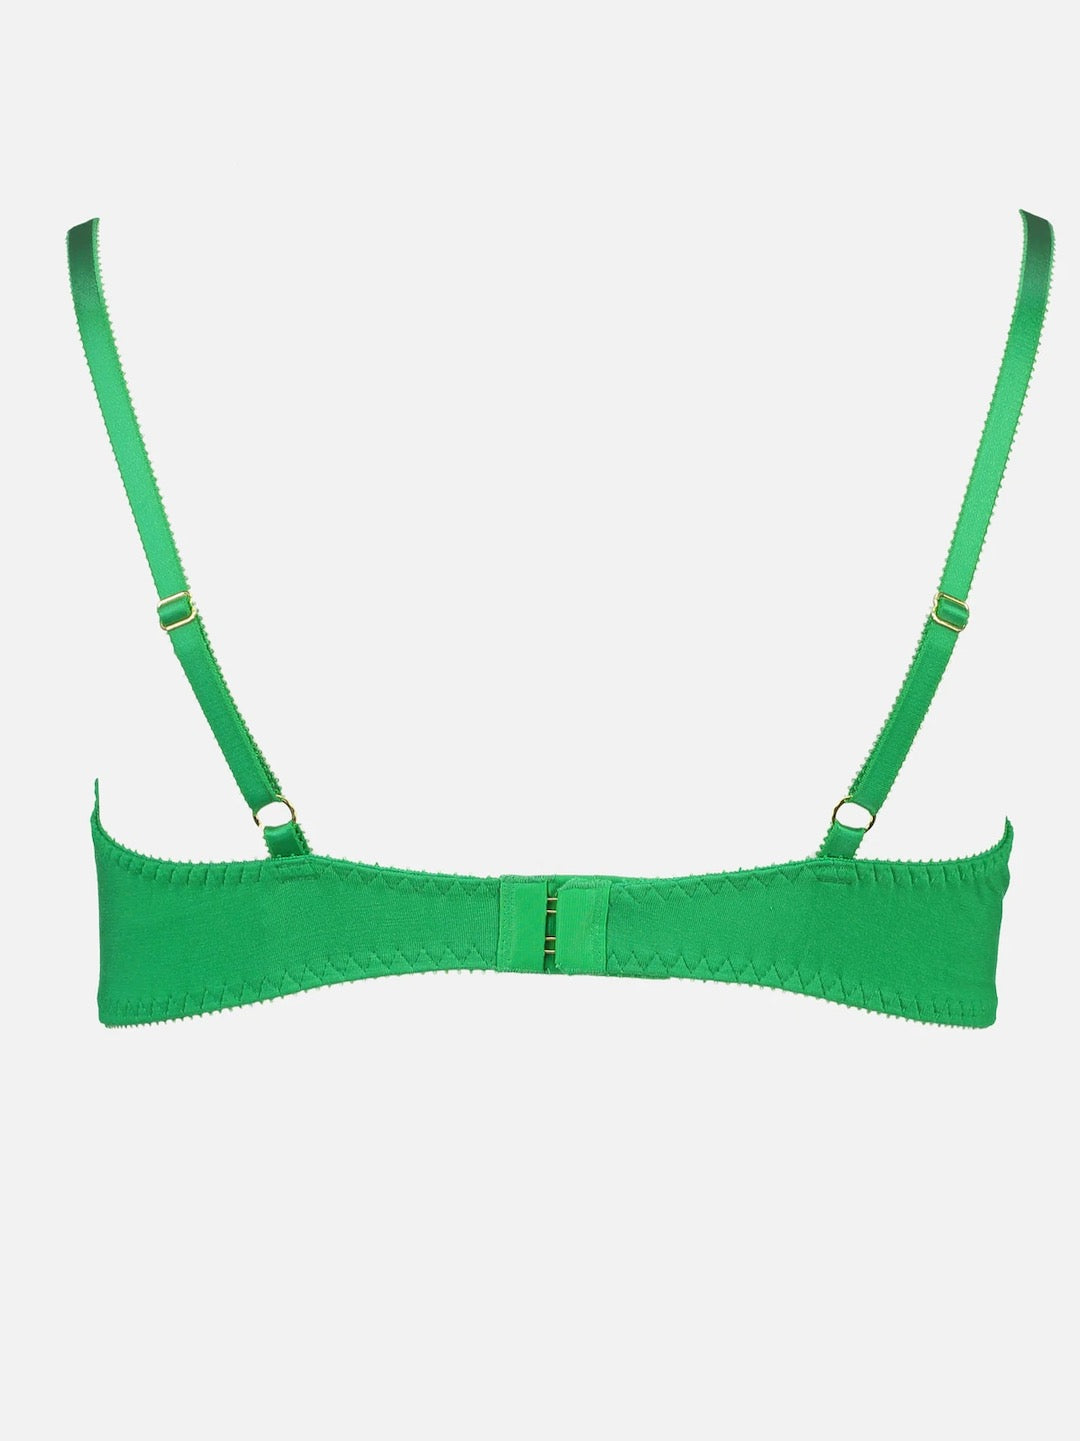 A green Angela Bra – Poise with straps made by Videris.